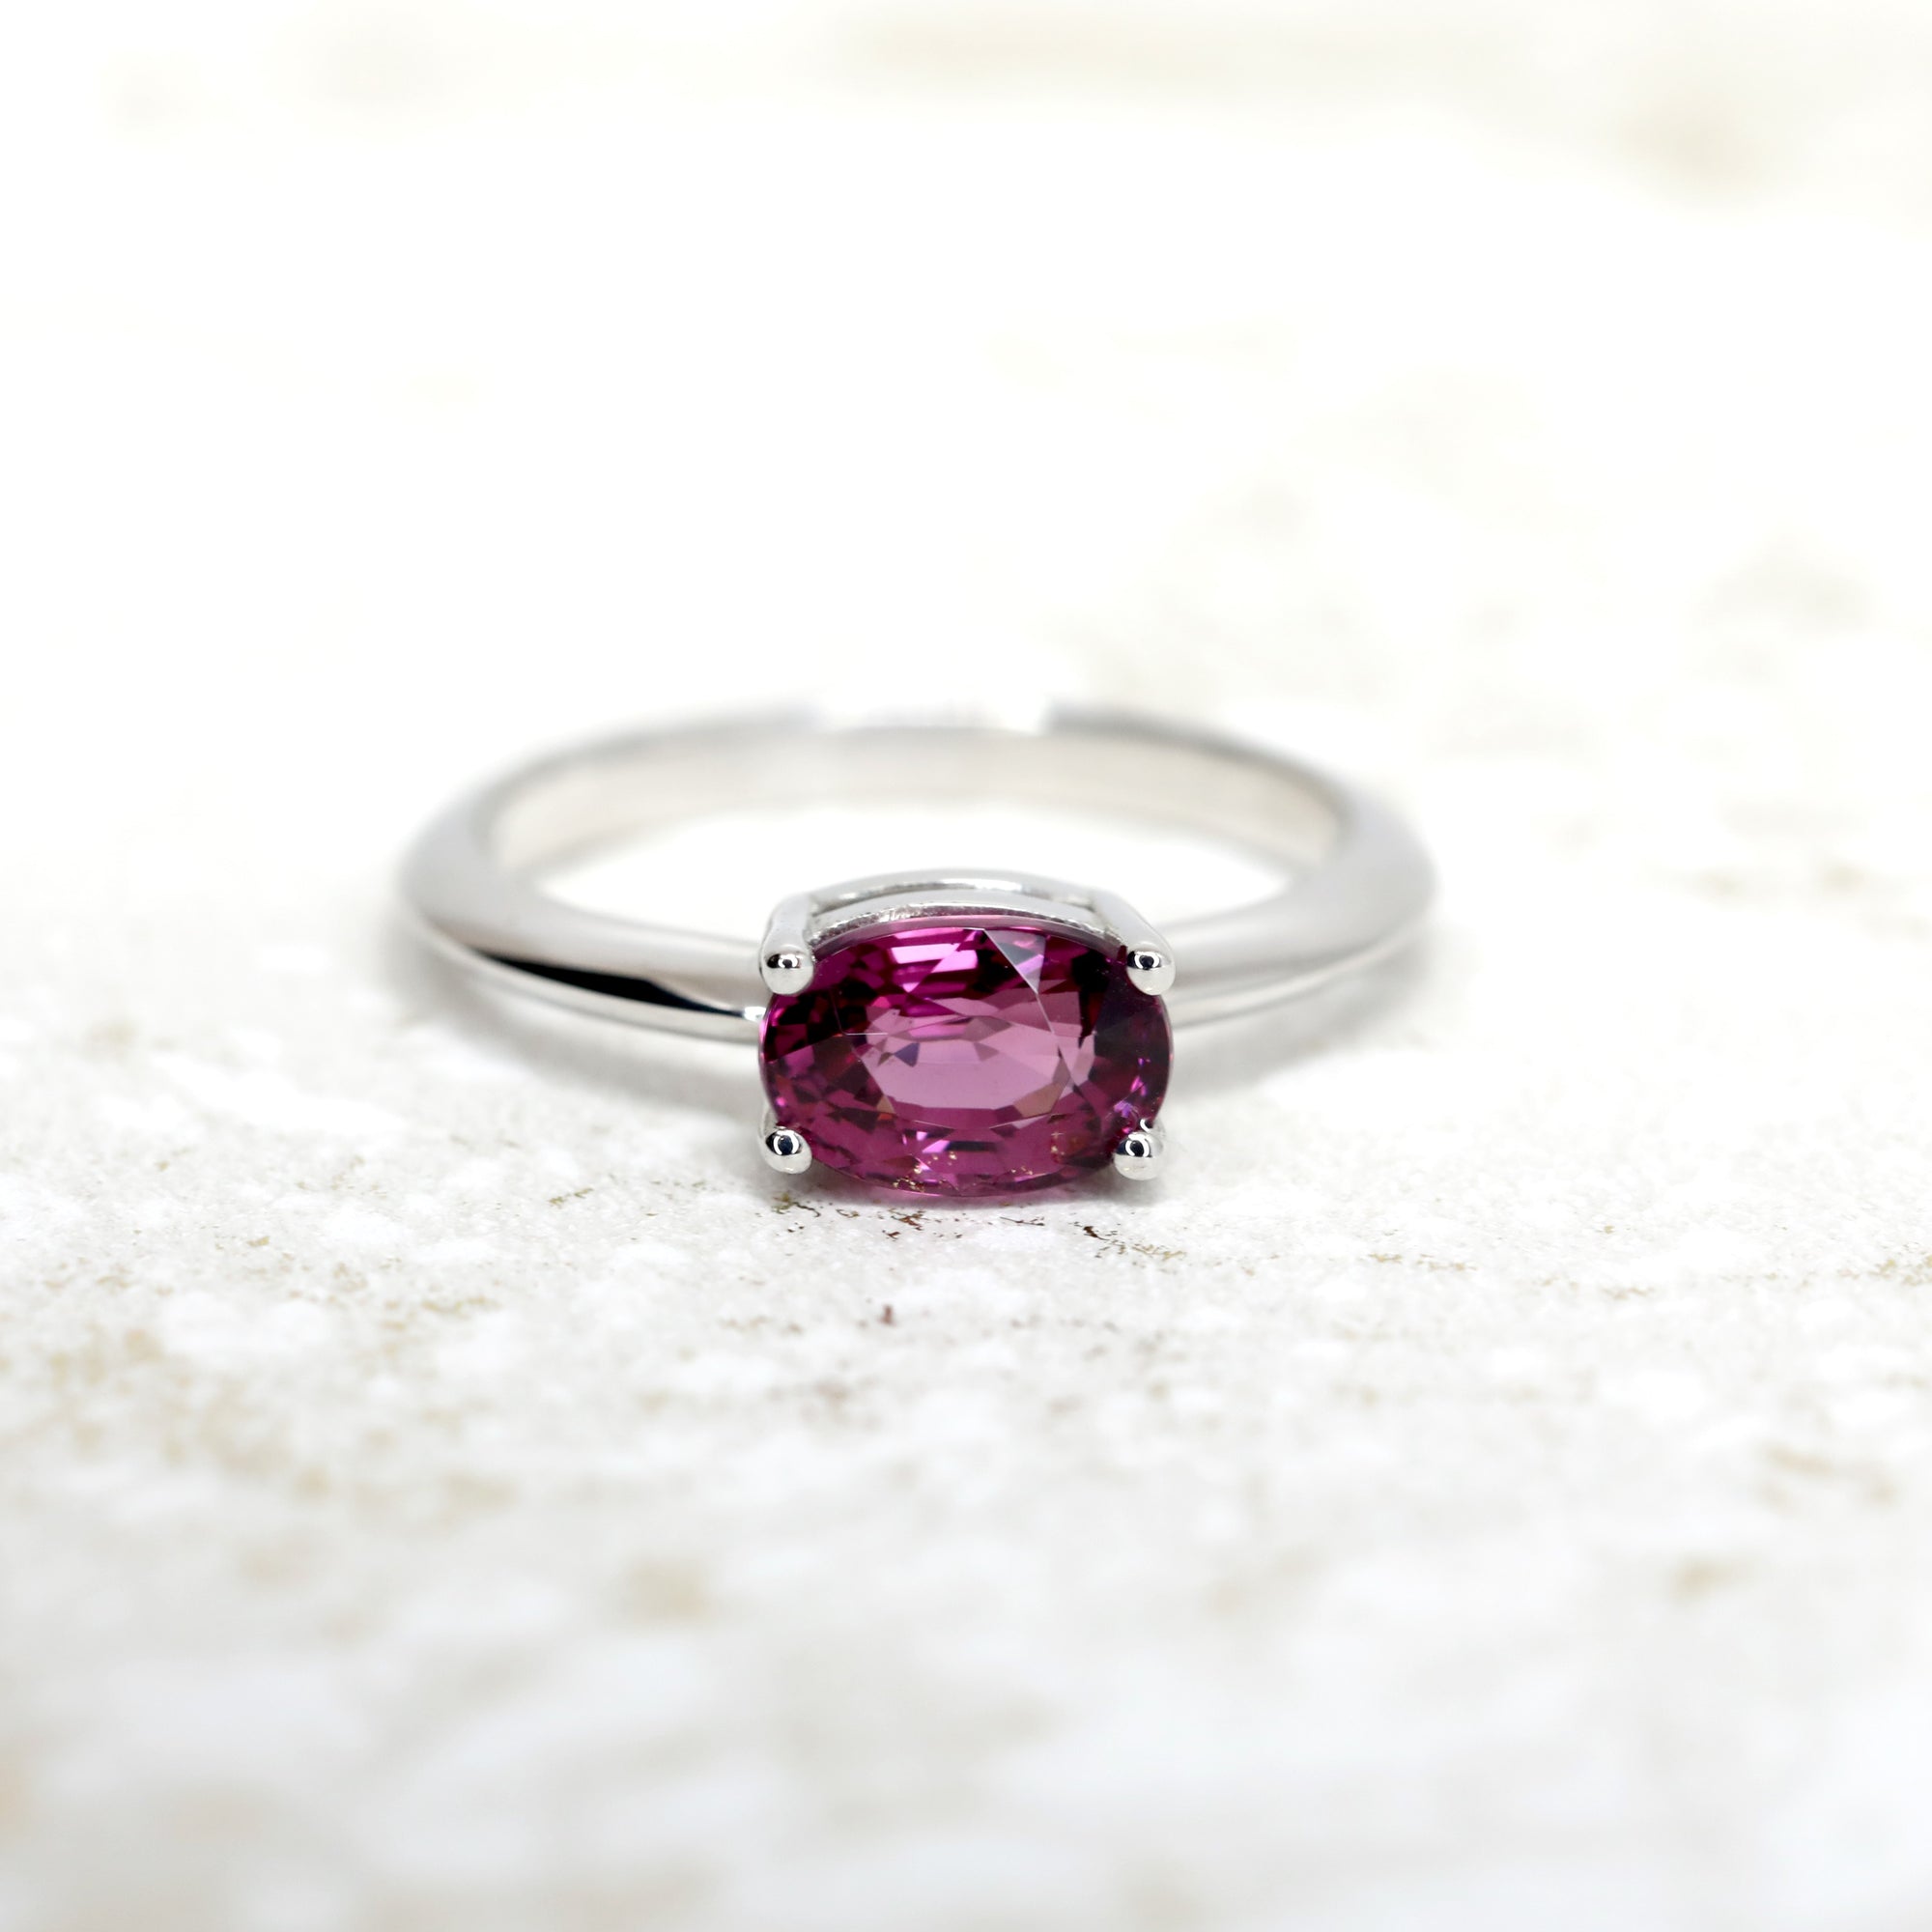 front view of garnet engagement ring bena jewelry beautiful red garnet rhodolite natural gemstone custom made color gemstone jewelry handmade in canada oval red gemstone gold ring bridal jewelry